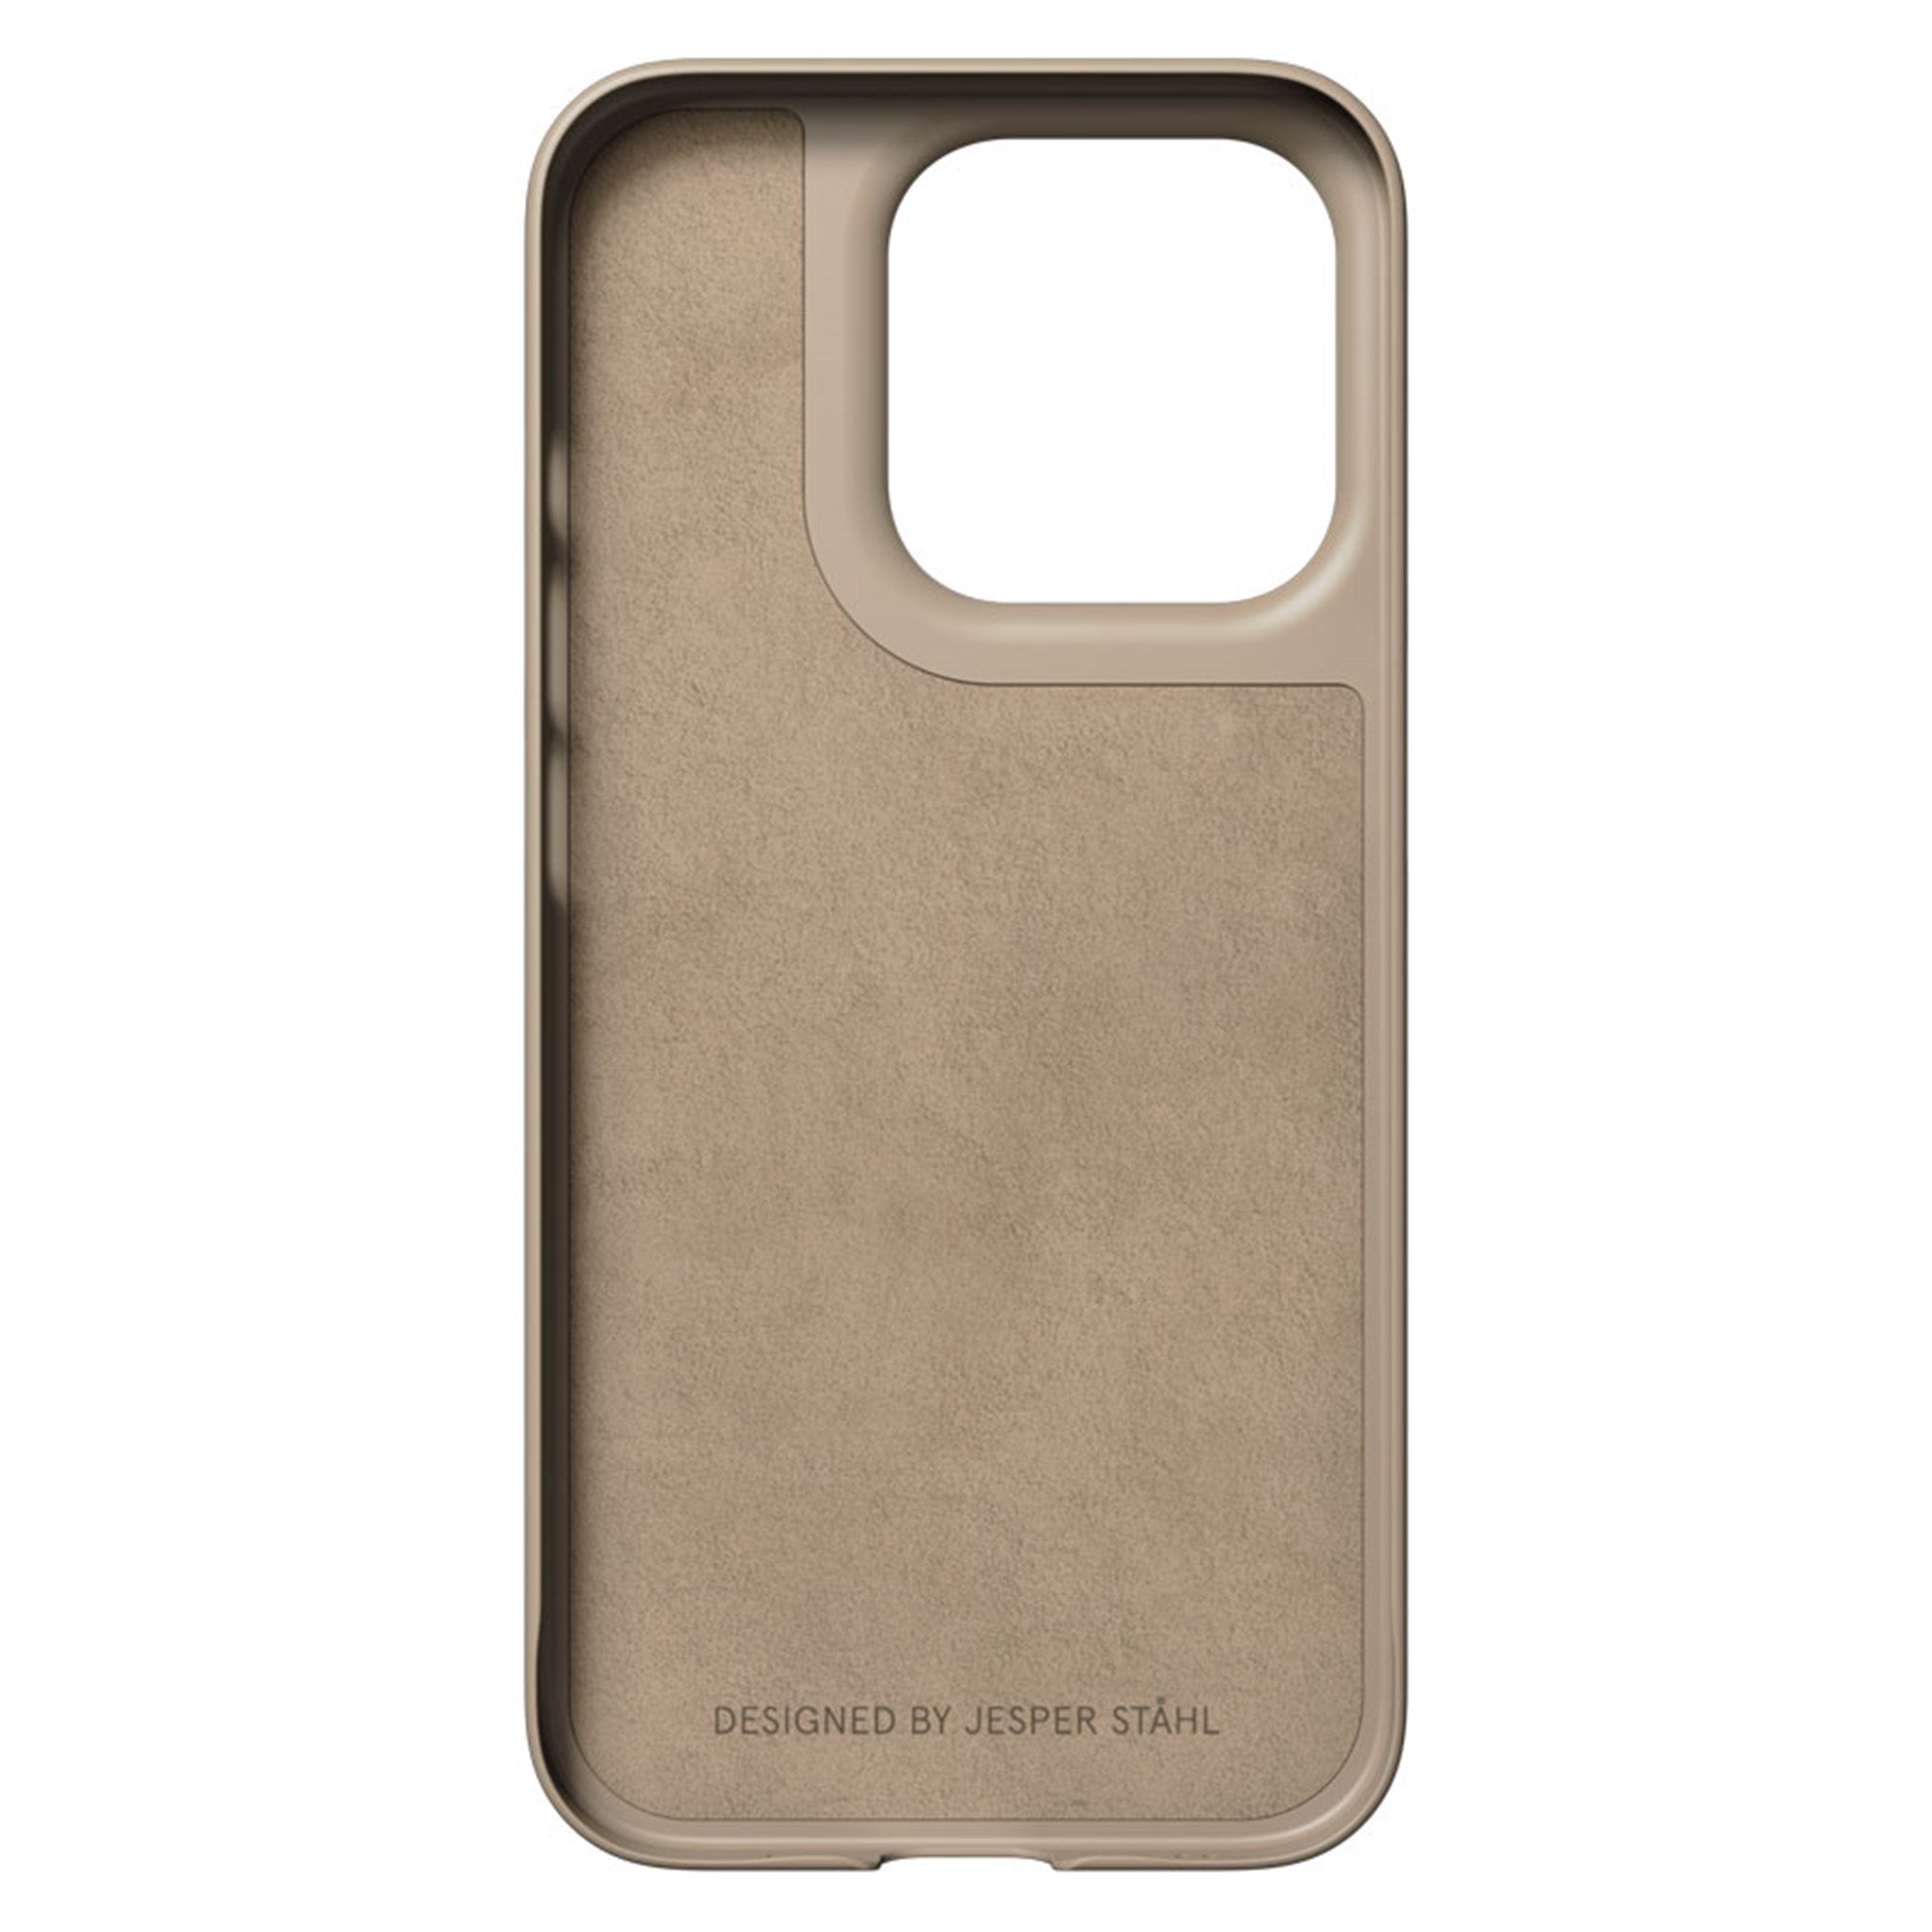 00 000 0092 0004 Nudient Thin Iphone 15 Pro Magsafe Mobilcover, Clay Beige 2